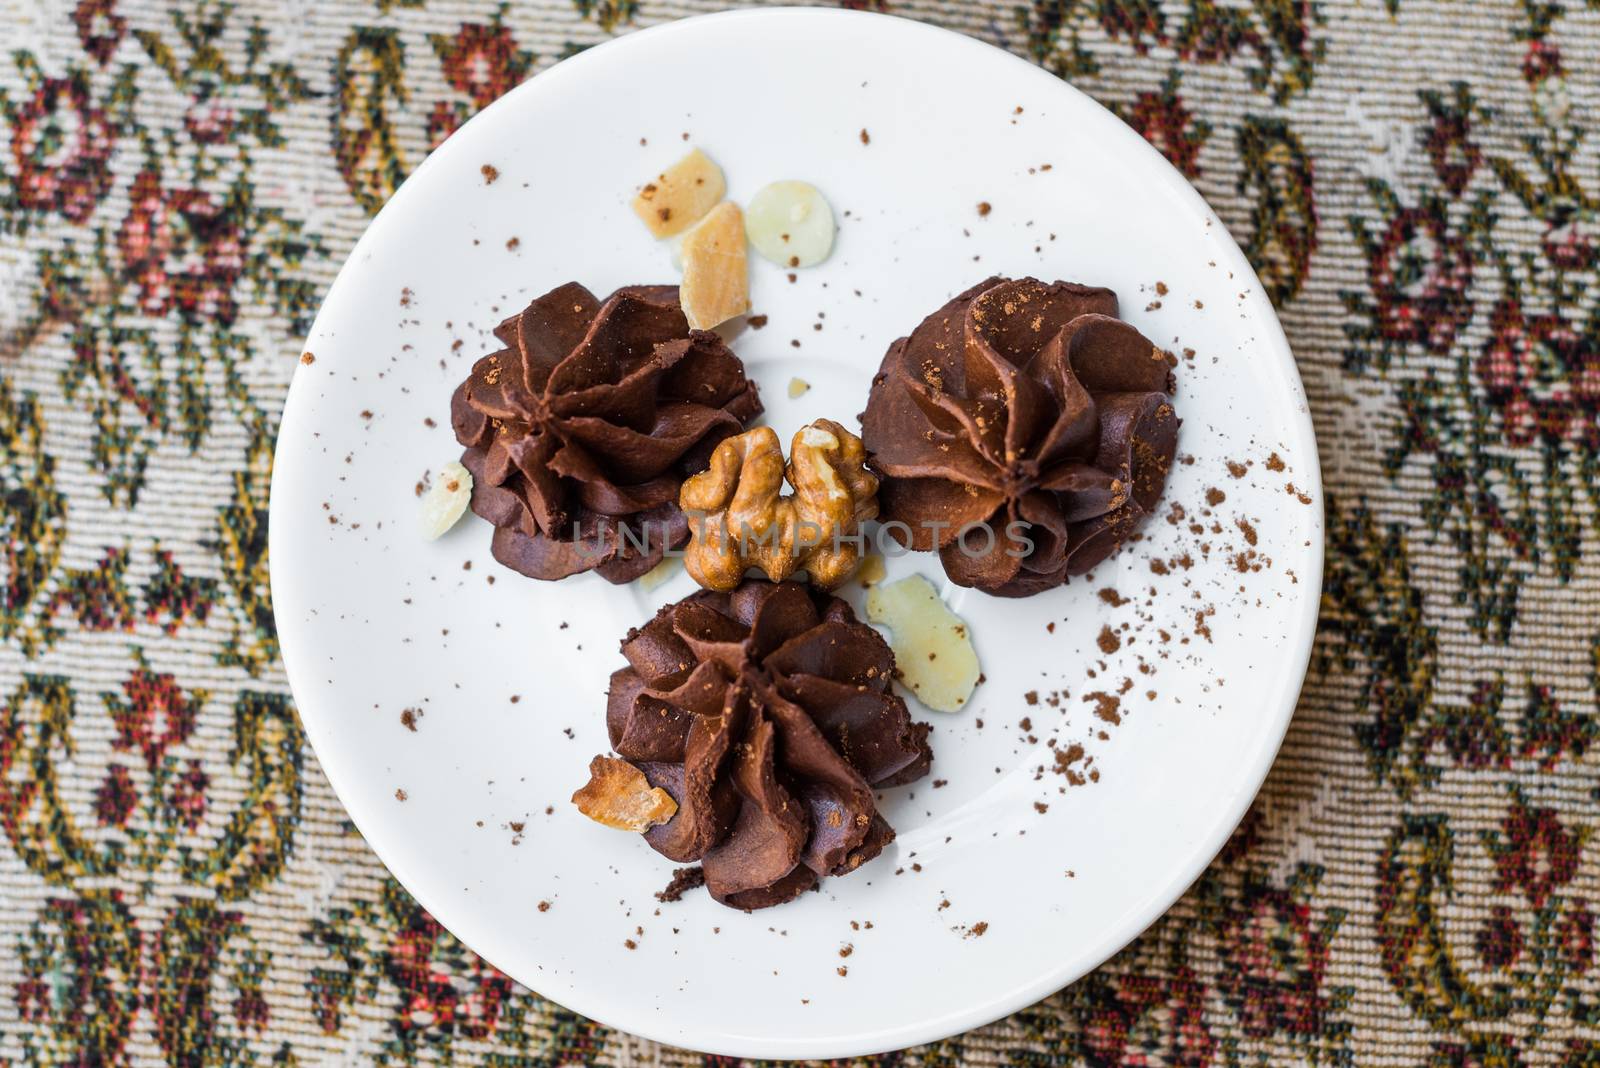 Homemade chocolate truffles with nuts and cocoa powder in a white plate